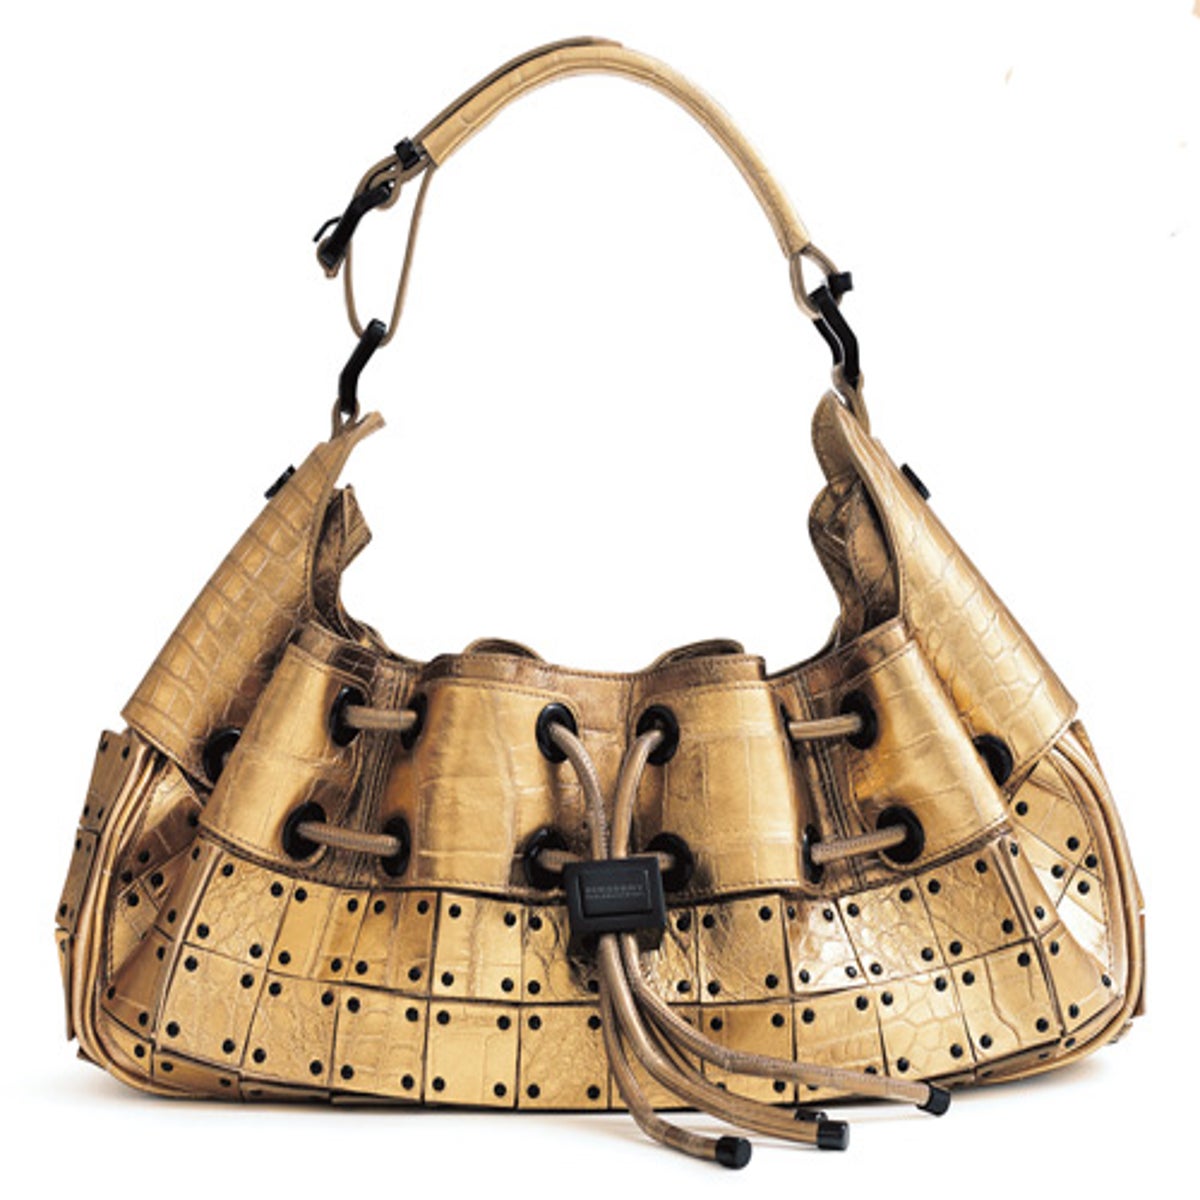 Would you pay £13,000 for this bag?, The Independent